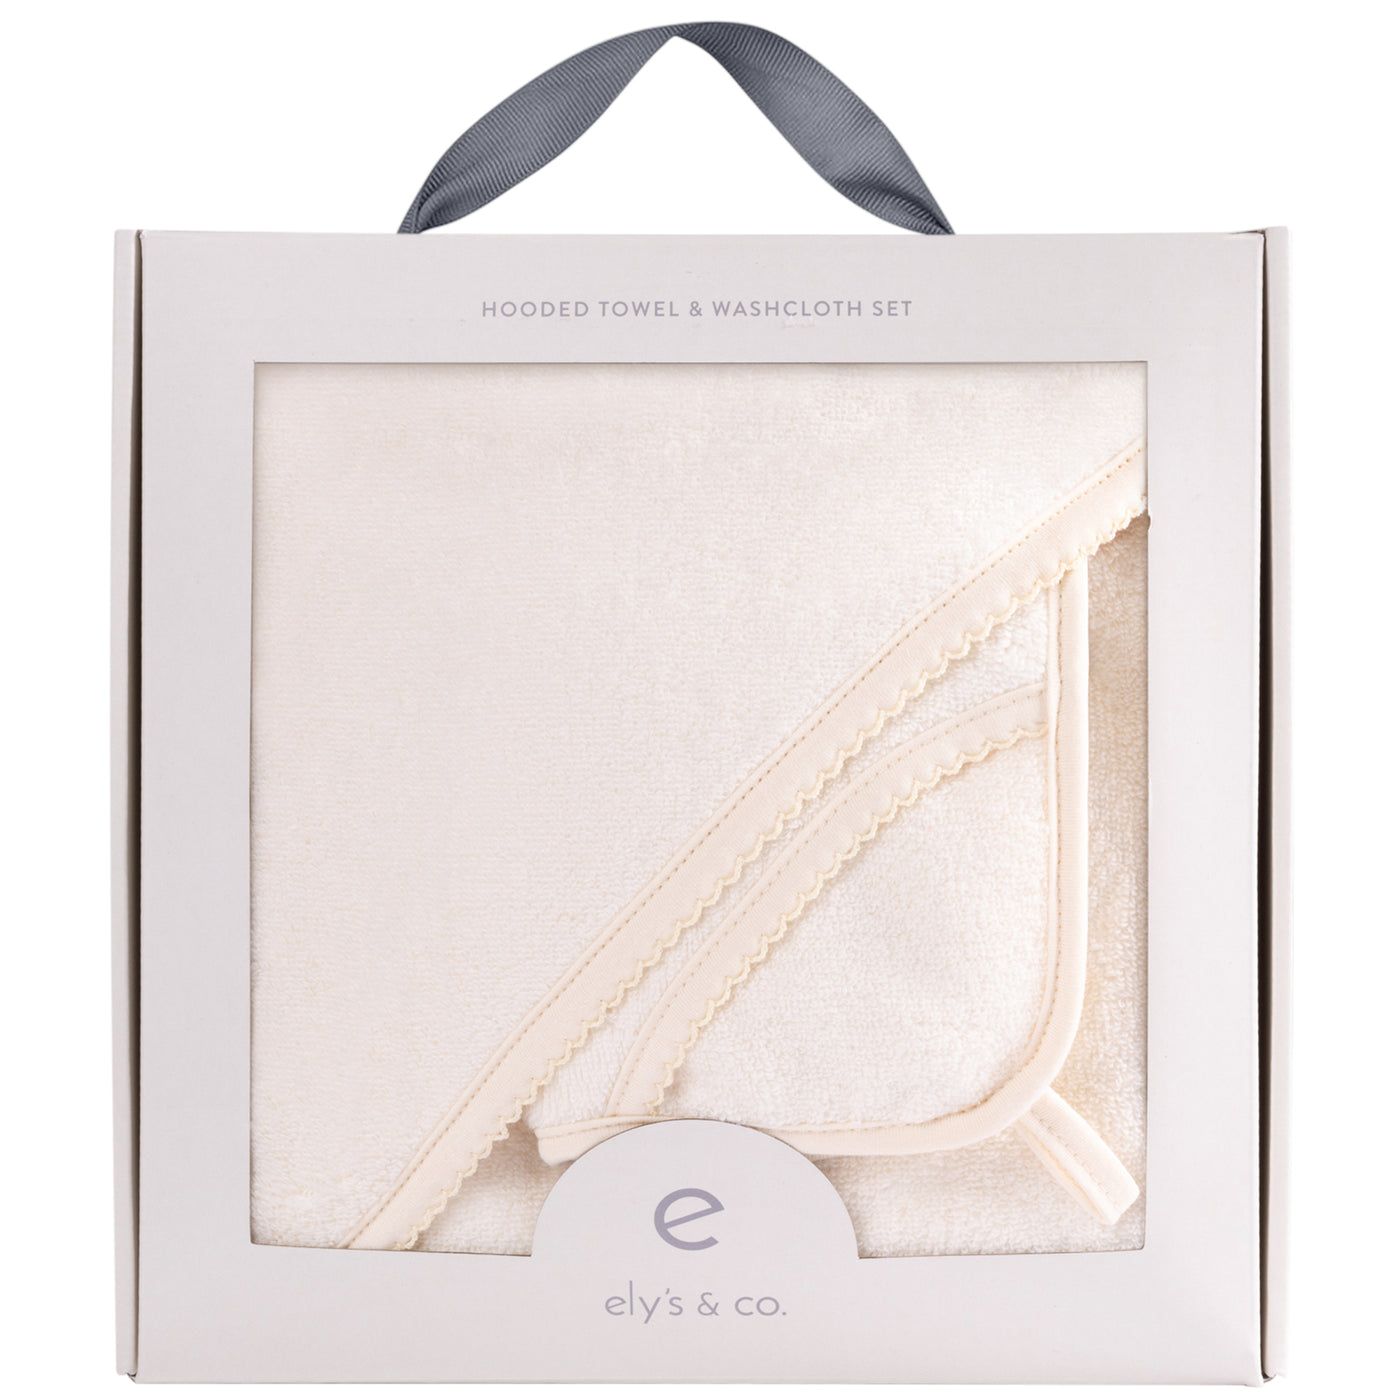 Ely's & Co. Solid Scalloped Hooded Bath Towel and Washcloth Set - Cream Collection